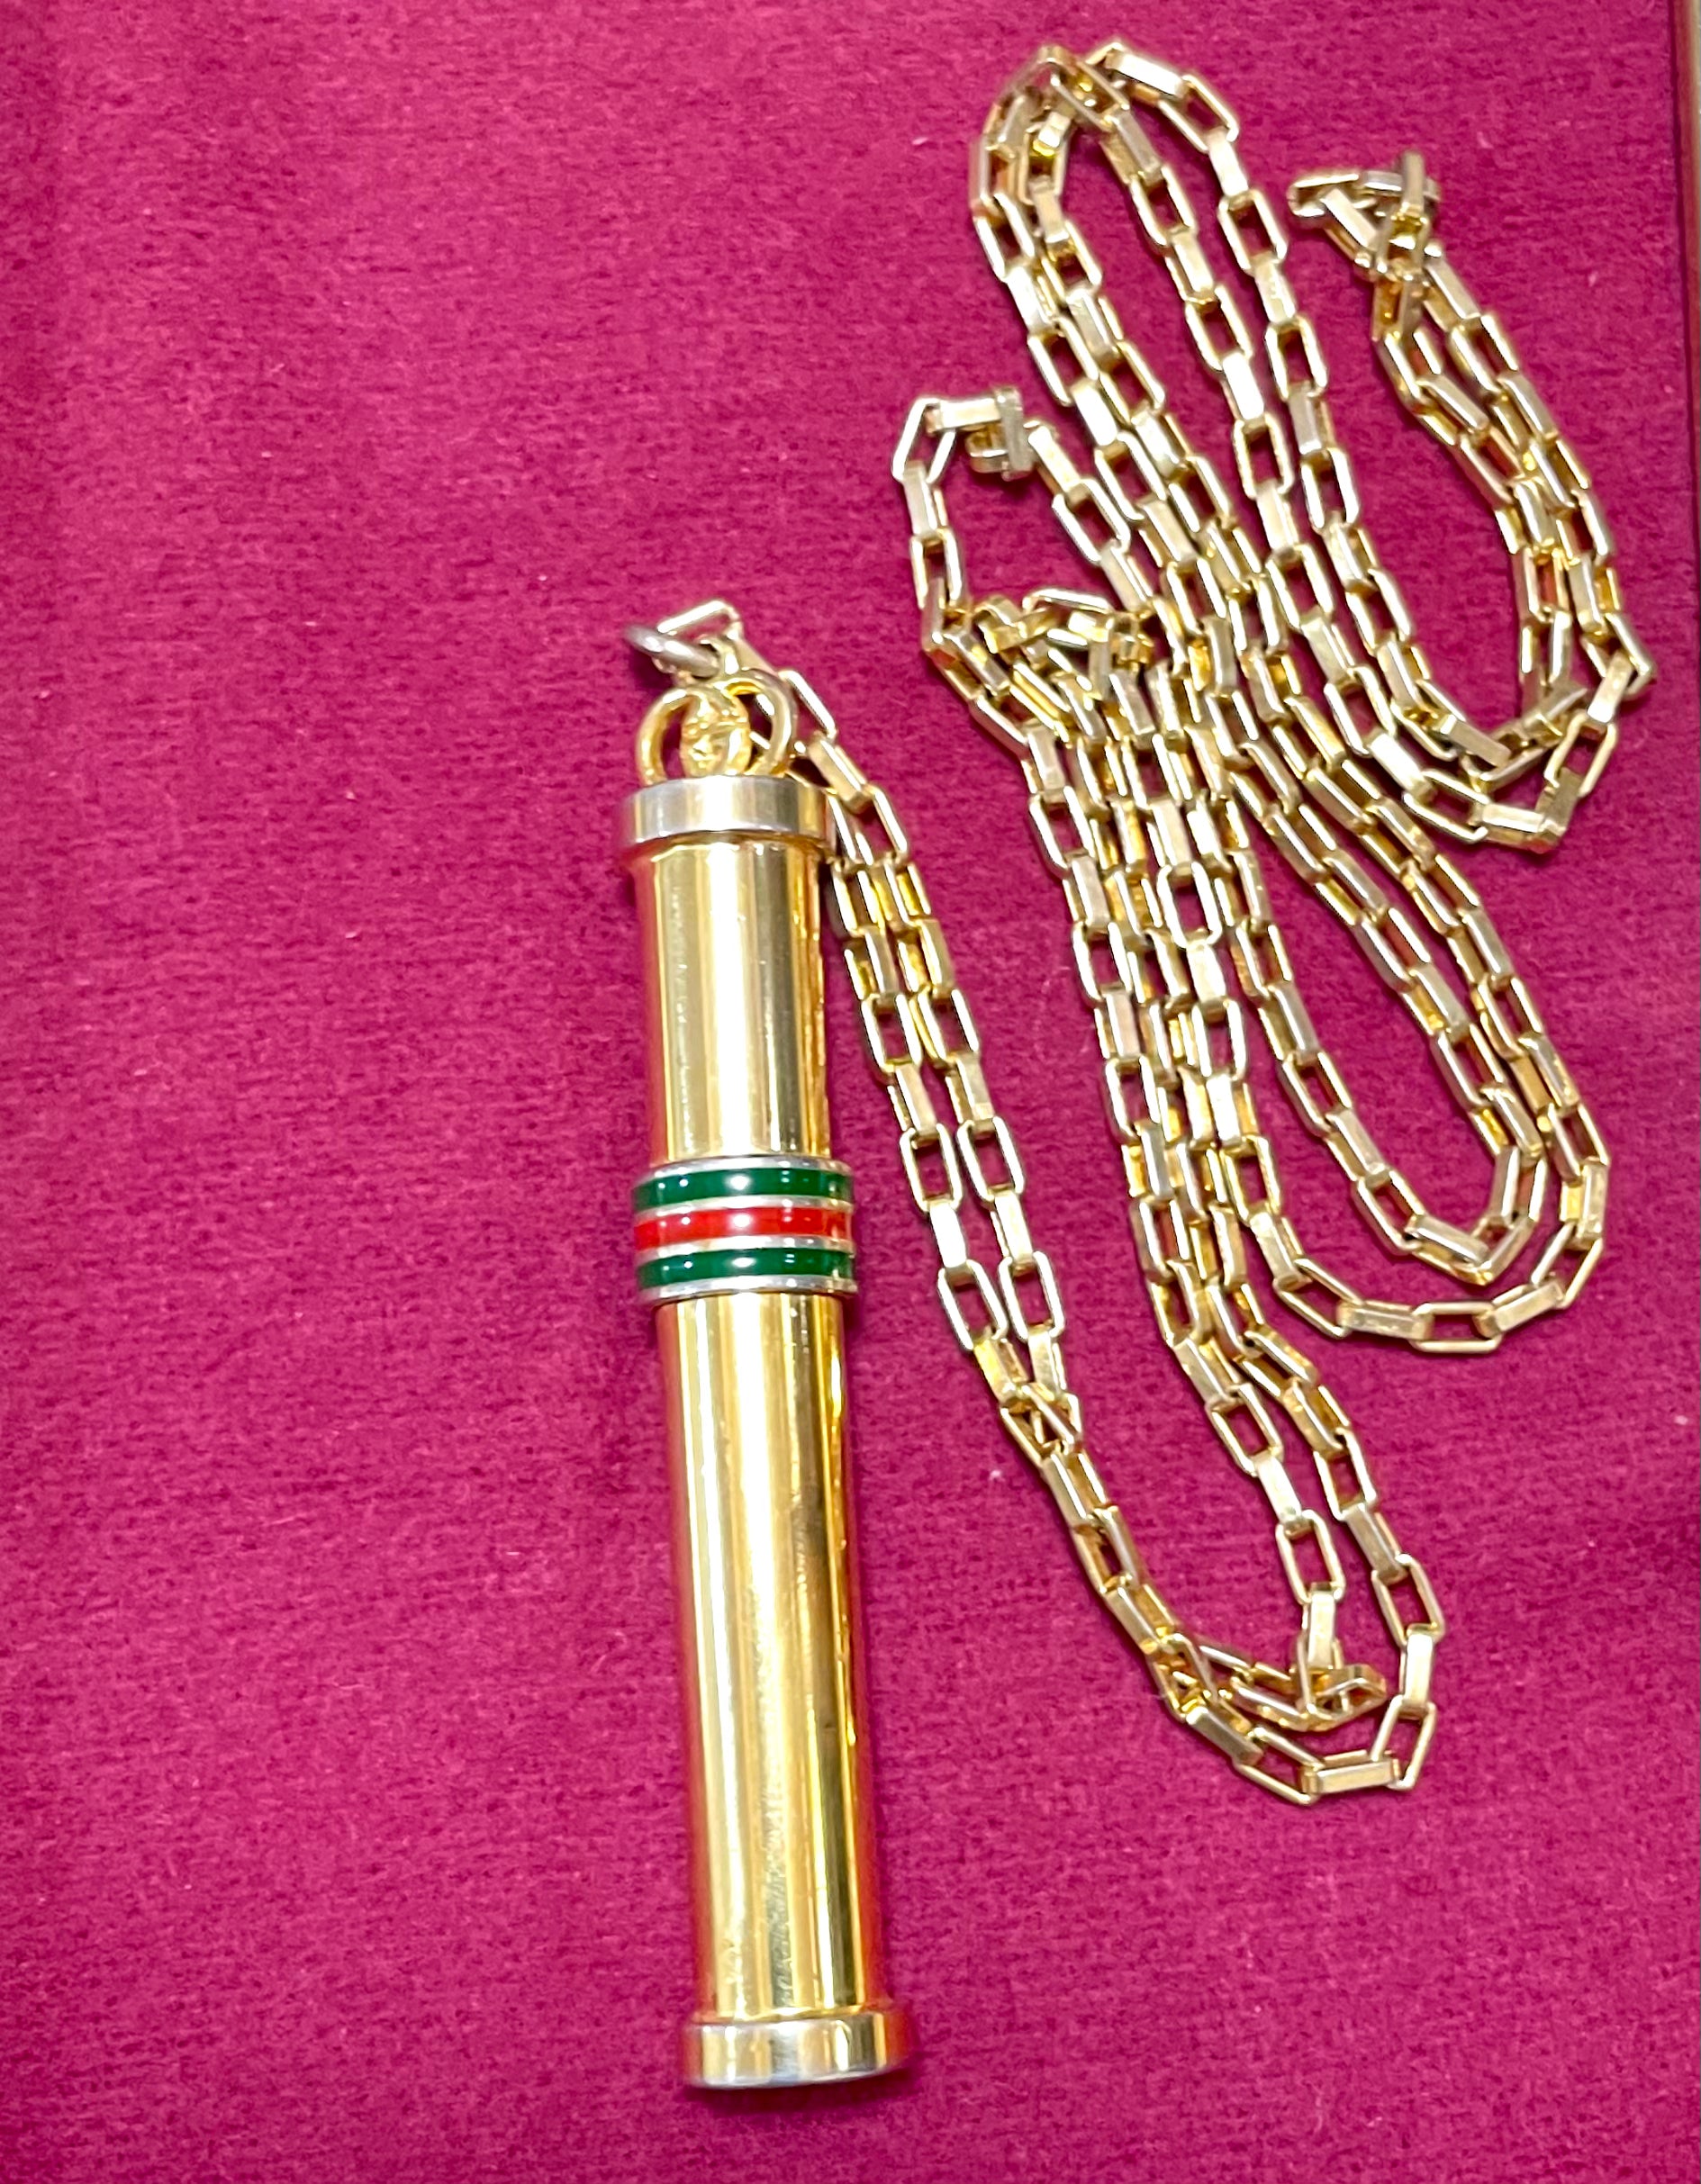 Vintage Gucci golden stick perfume bottle necklace with webbing, green and red color. Unisex. Best vintage jewelry. 050527ya2